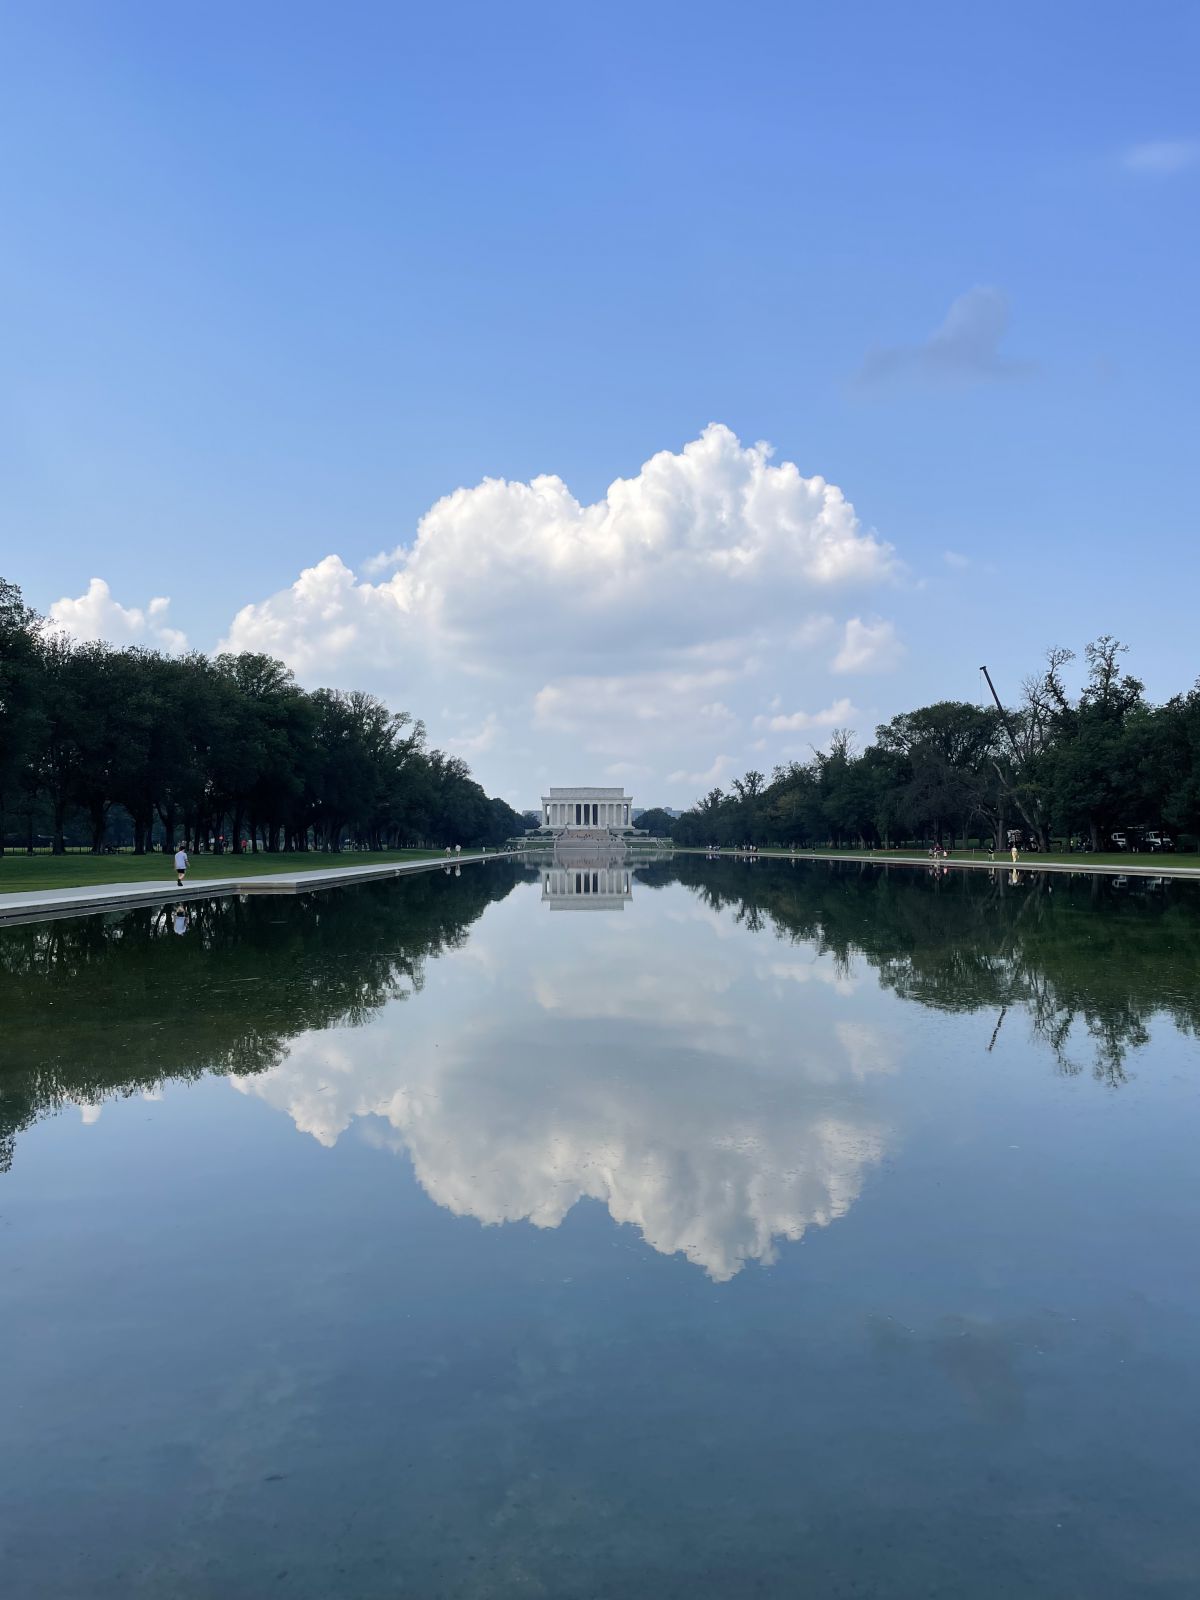 The reflecting pool with Lincoln memorial in the background